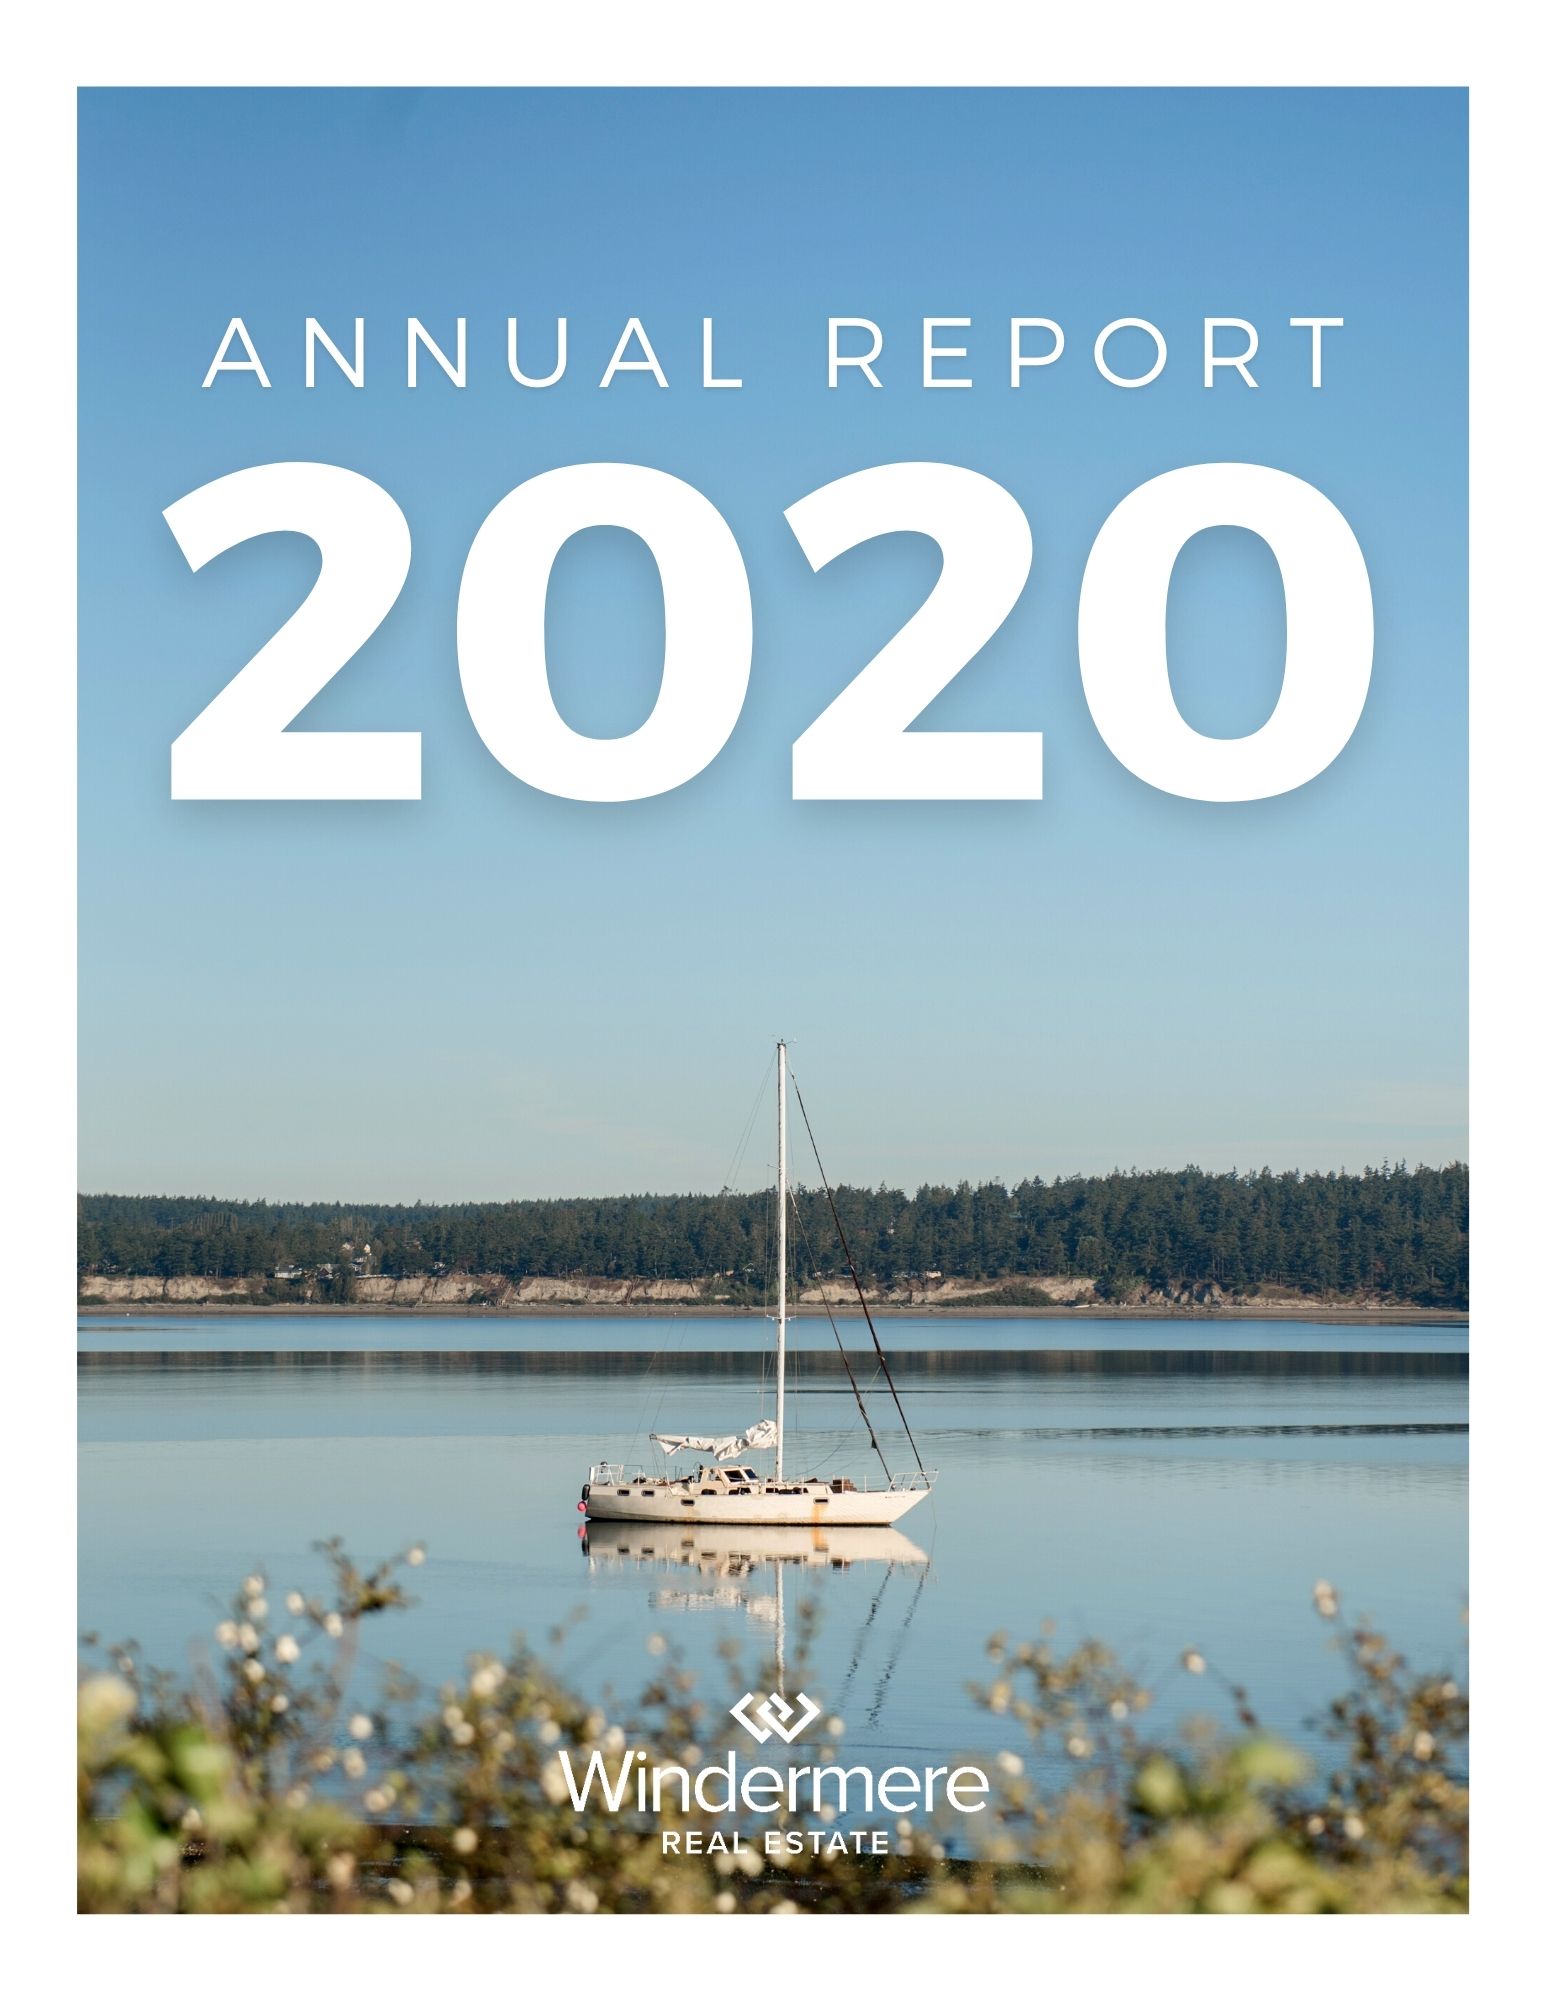 2020 Annual Report, Download